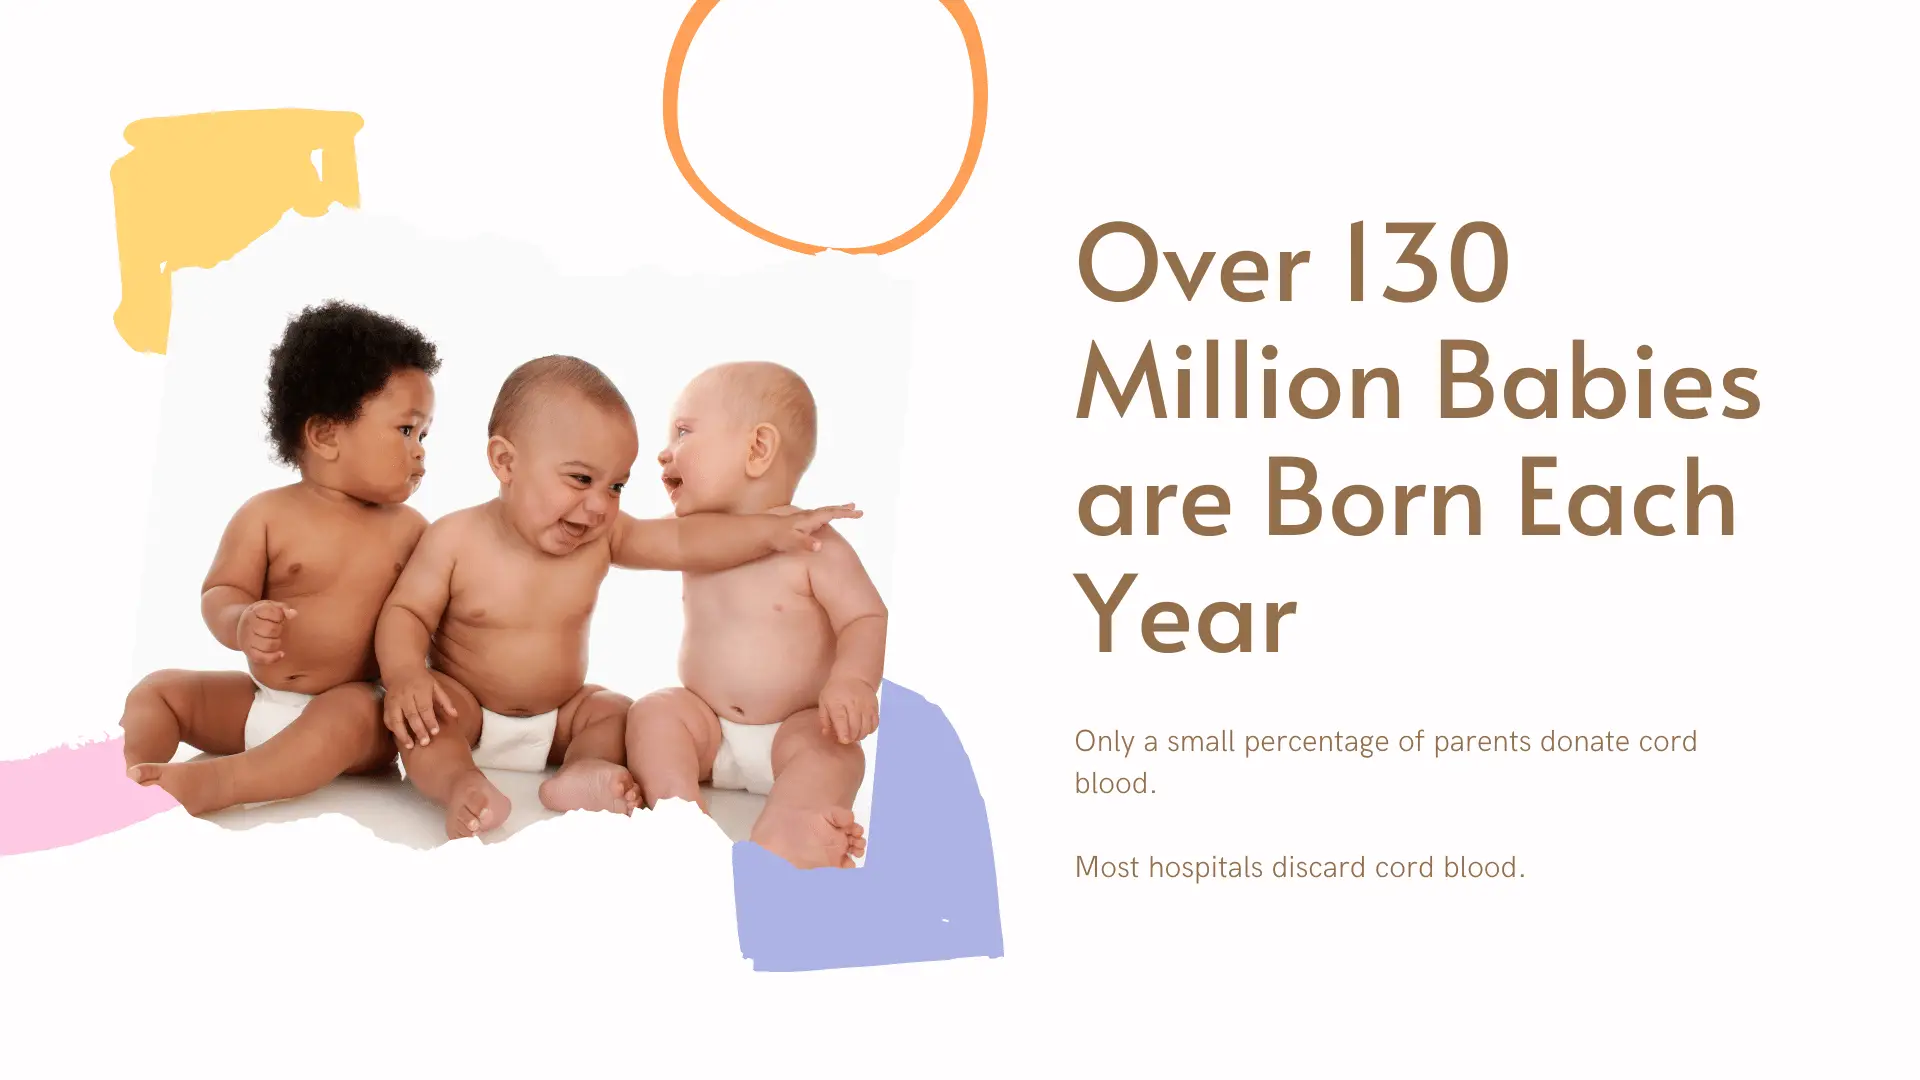 who can donate cord blood: Over 130 million babies are born every year 